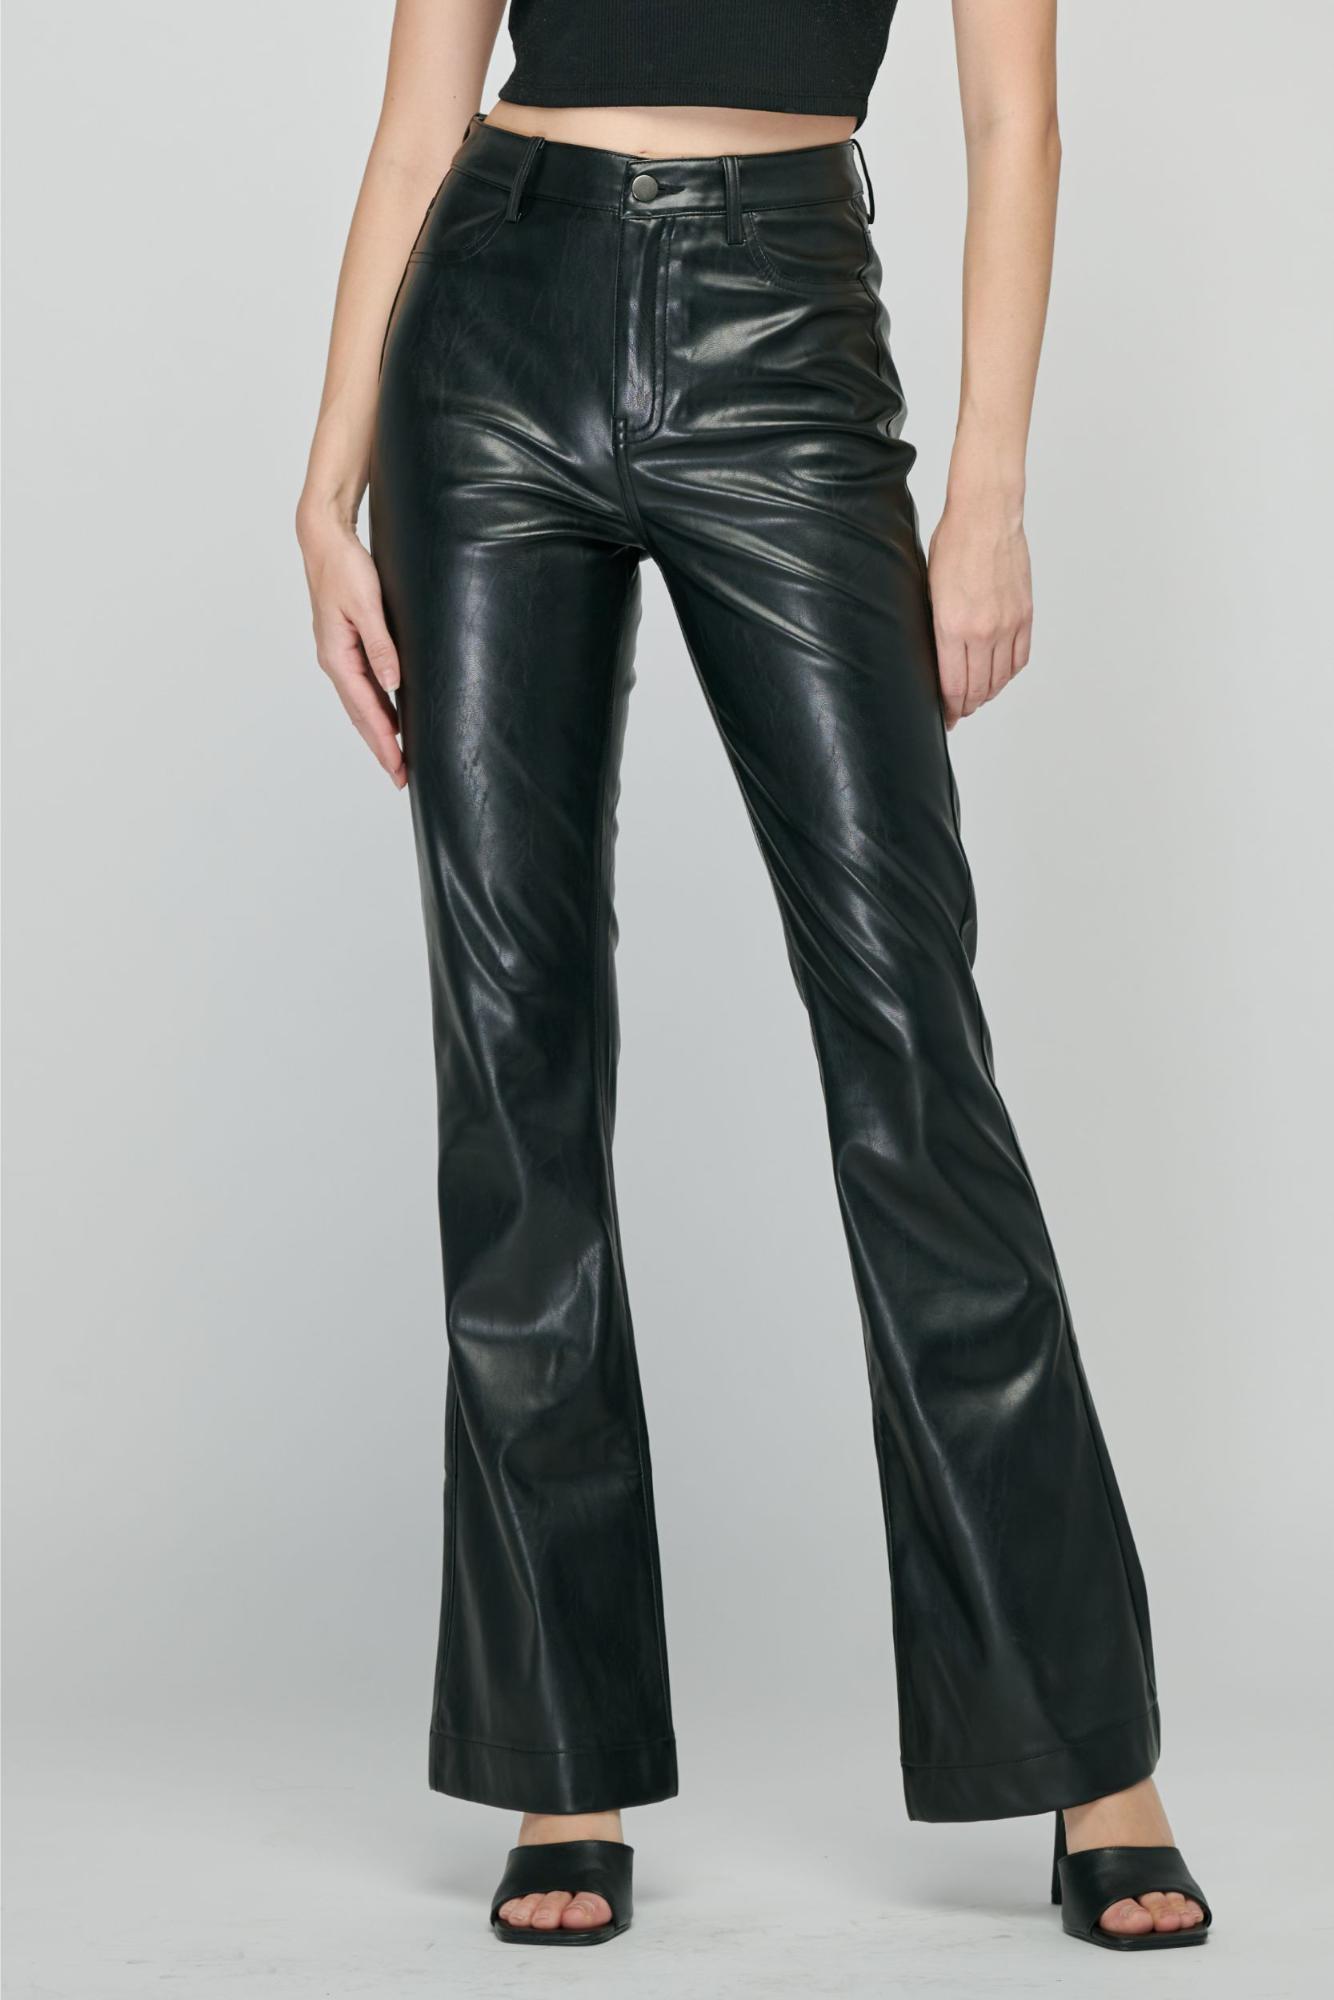 The Carla Leather High Rise Flare Pants